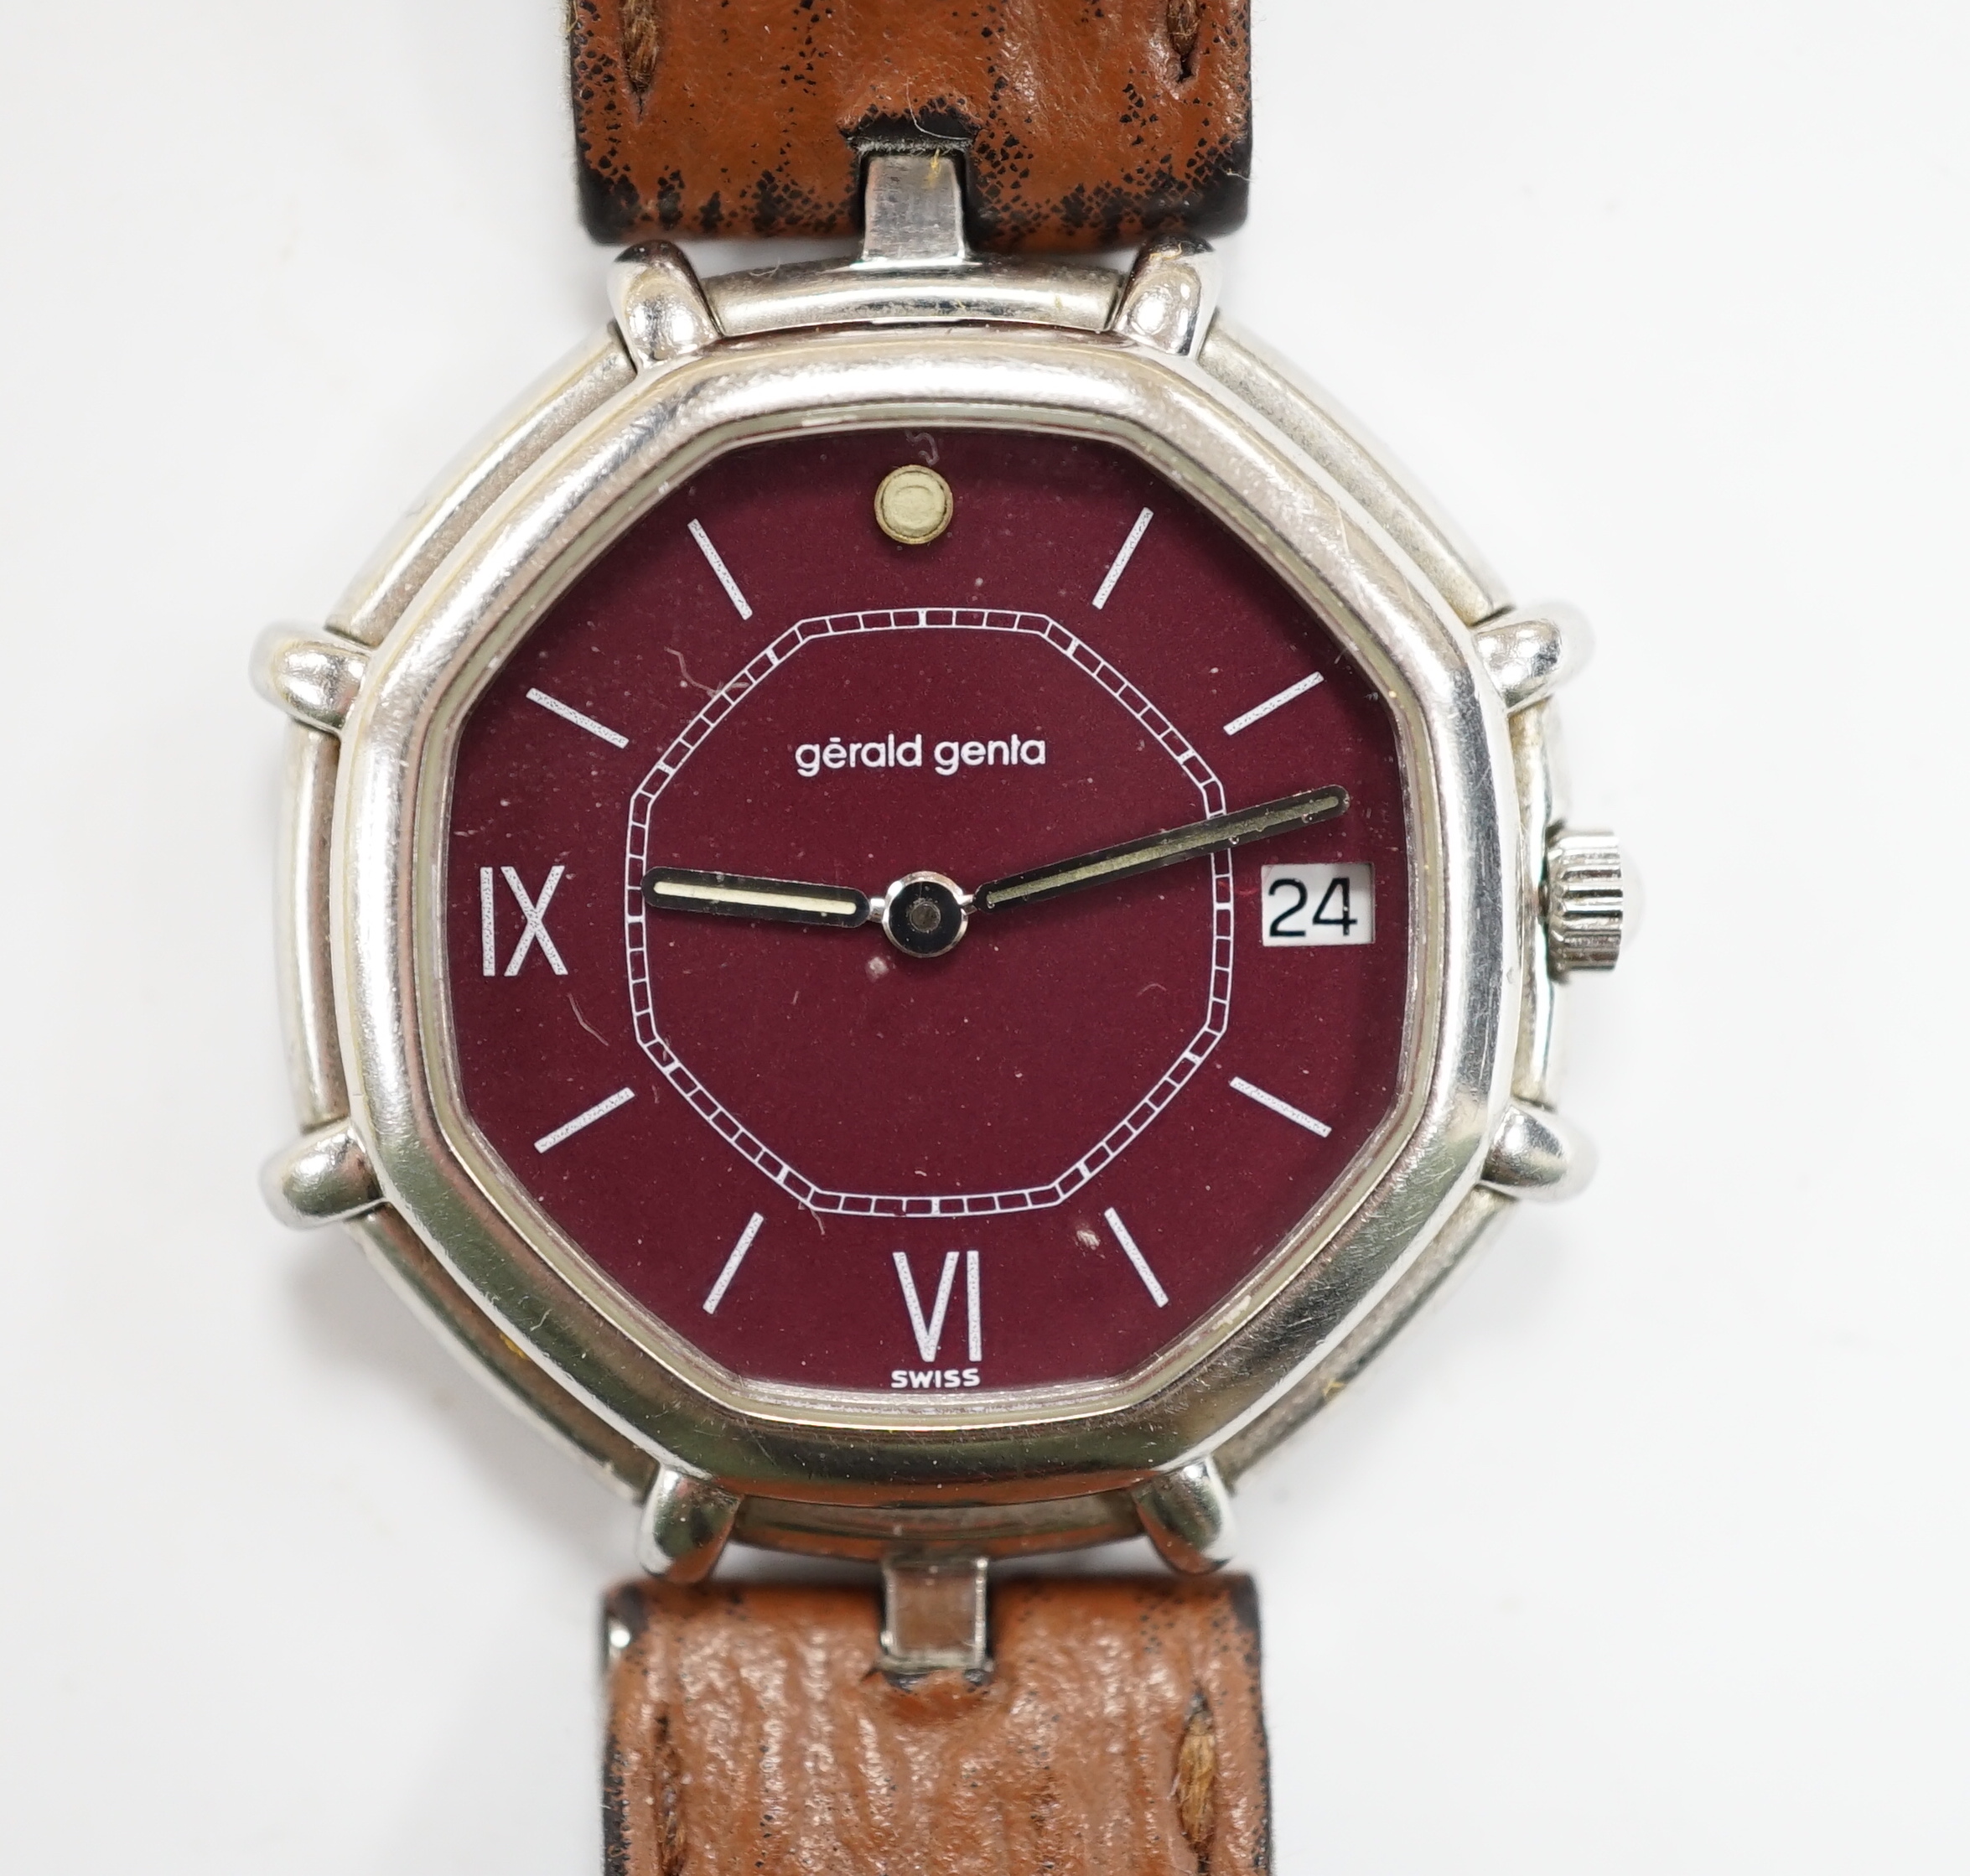 A gentleman's Swiss stainless steel Gerald Genta quartz octagonal wrist watch, with burgundy dial and Roman and baton numerals, on a leather strap, case diameter 32mm, with original box, leather pouch and guarantee.